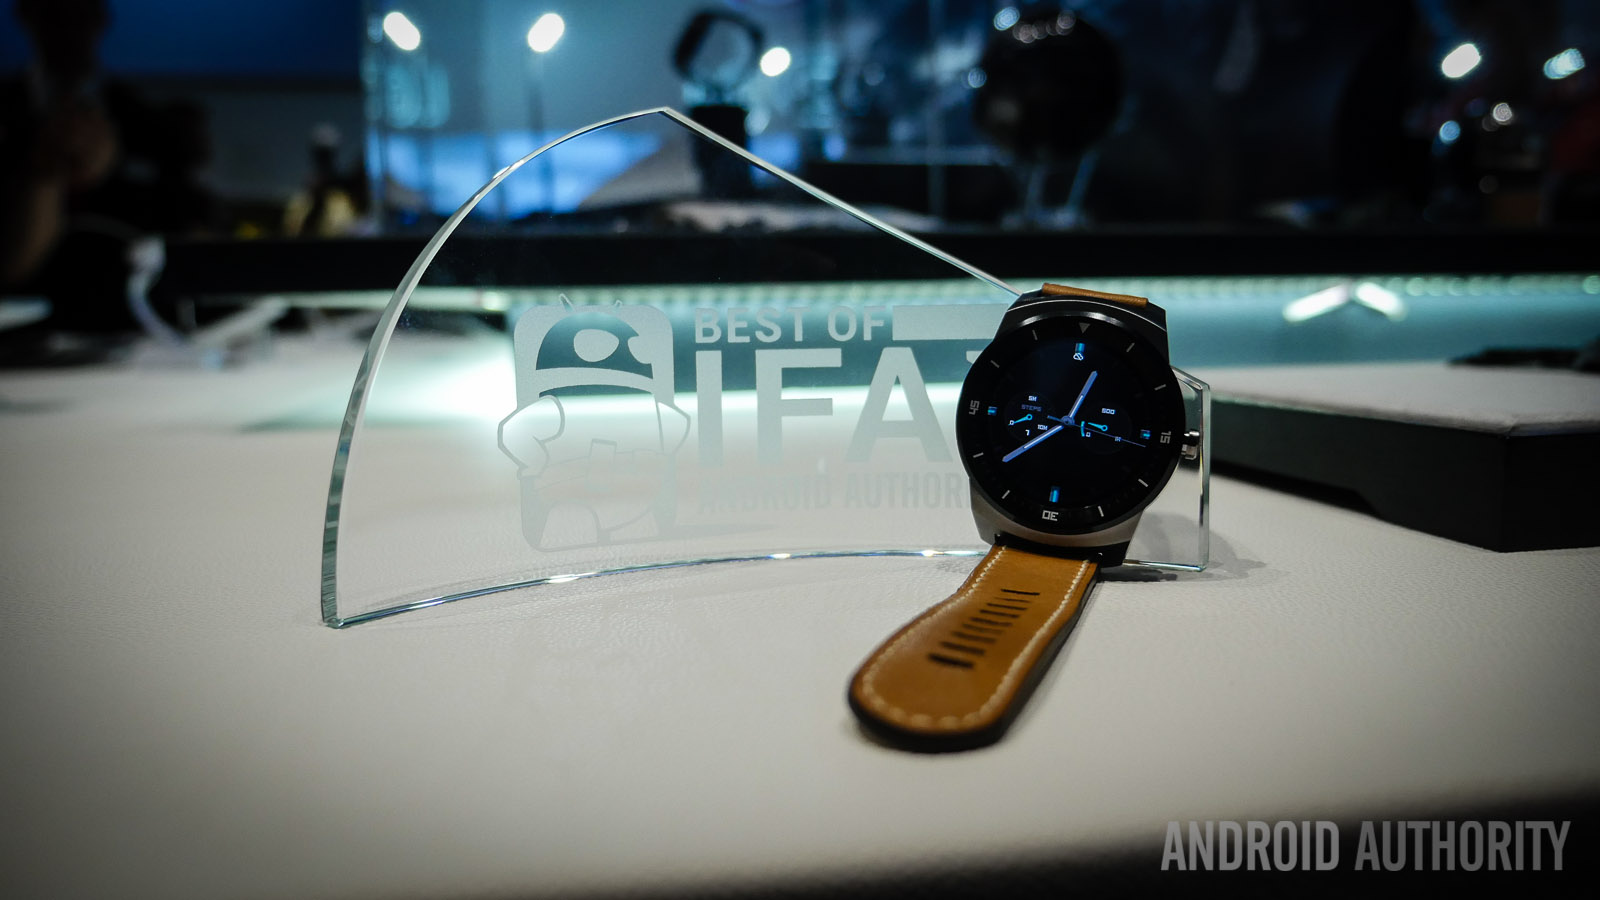 best of ifa 2014 awards (28 of 37)